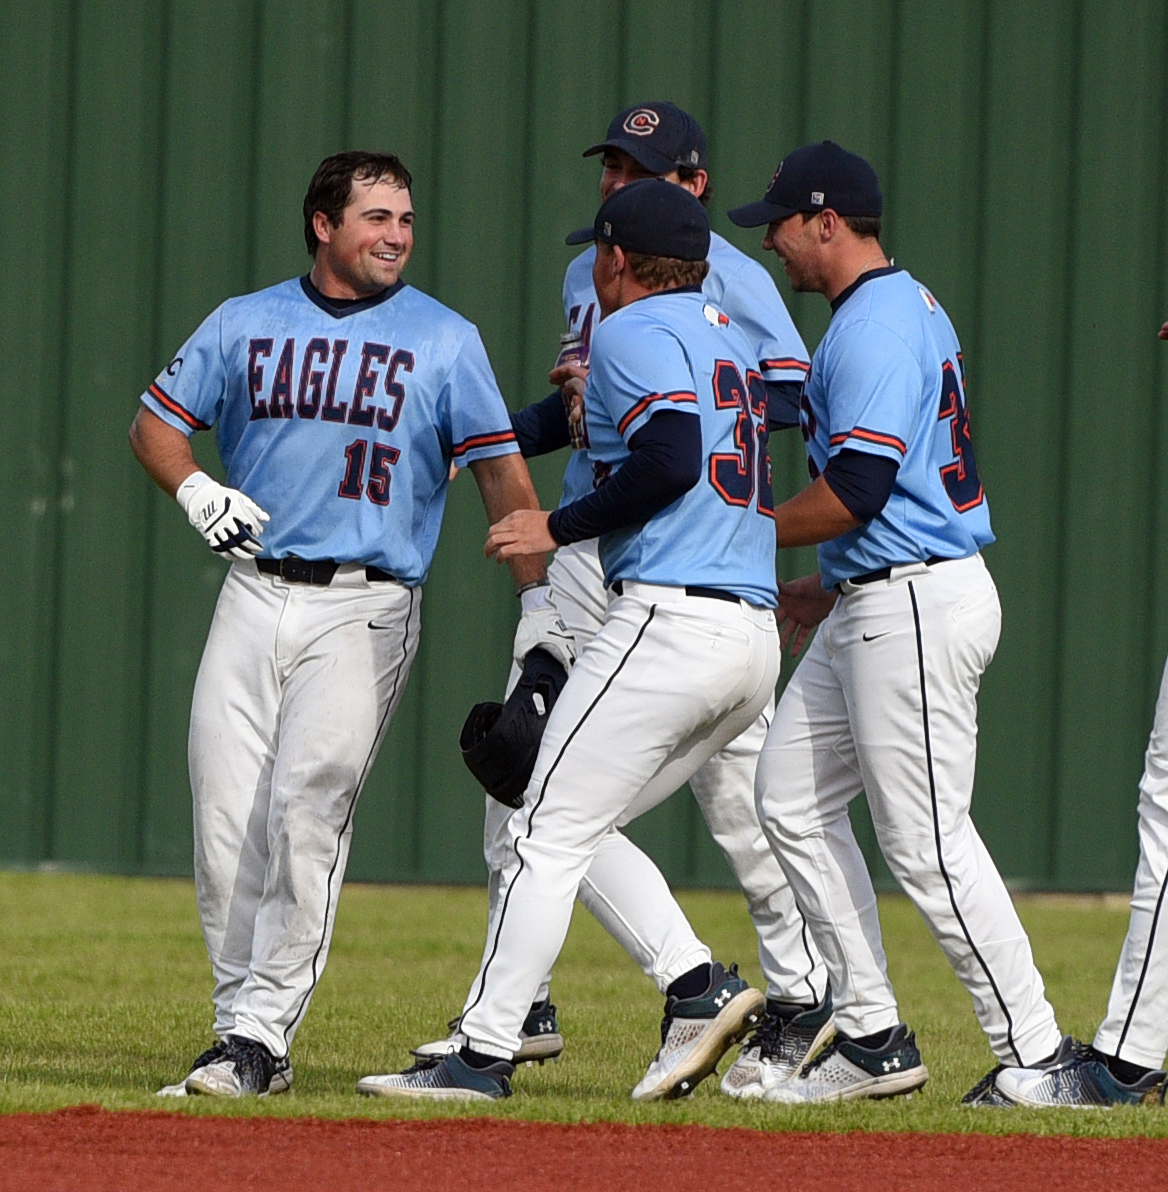 Eagles rally to salvage series with Catawba